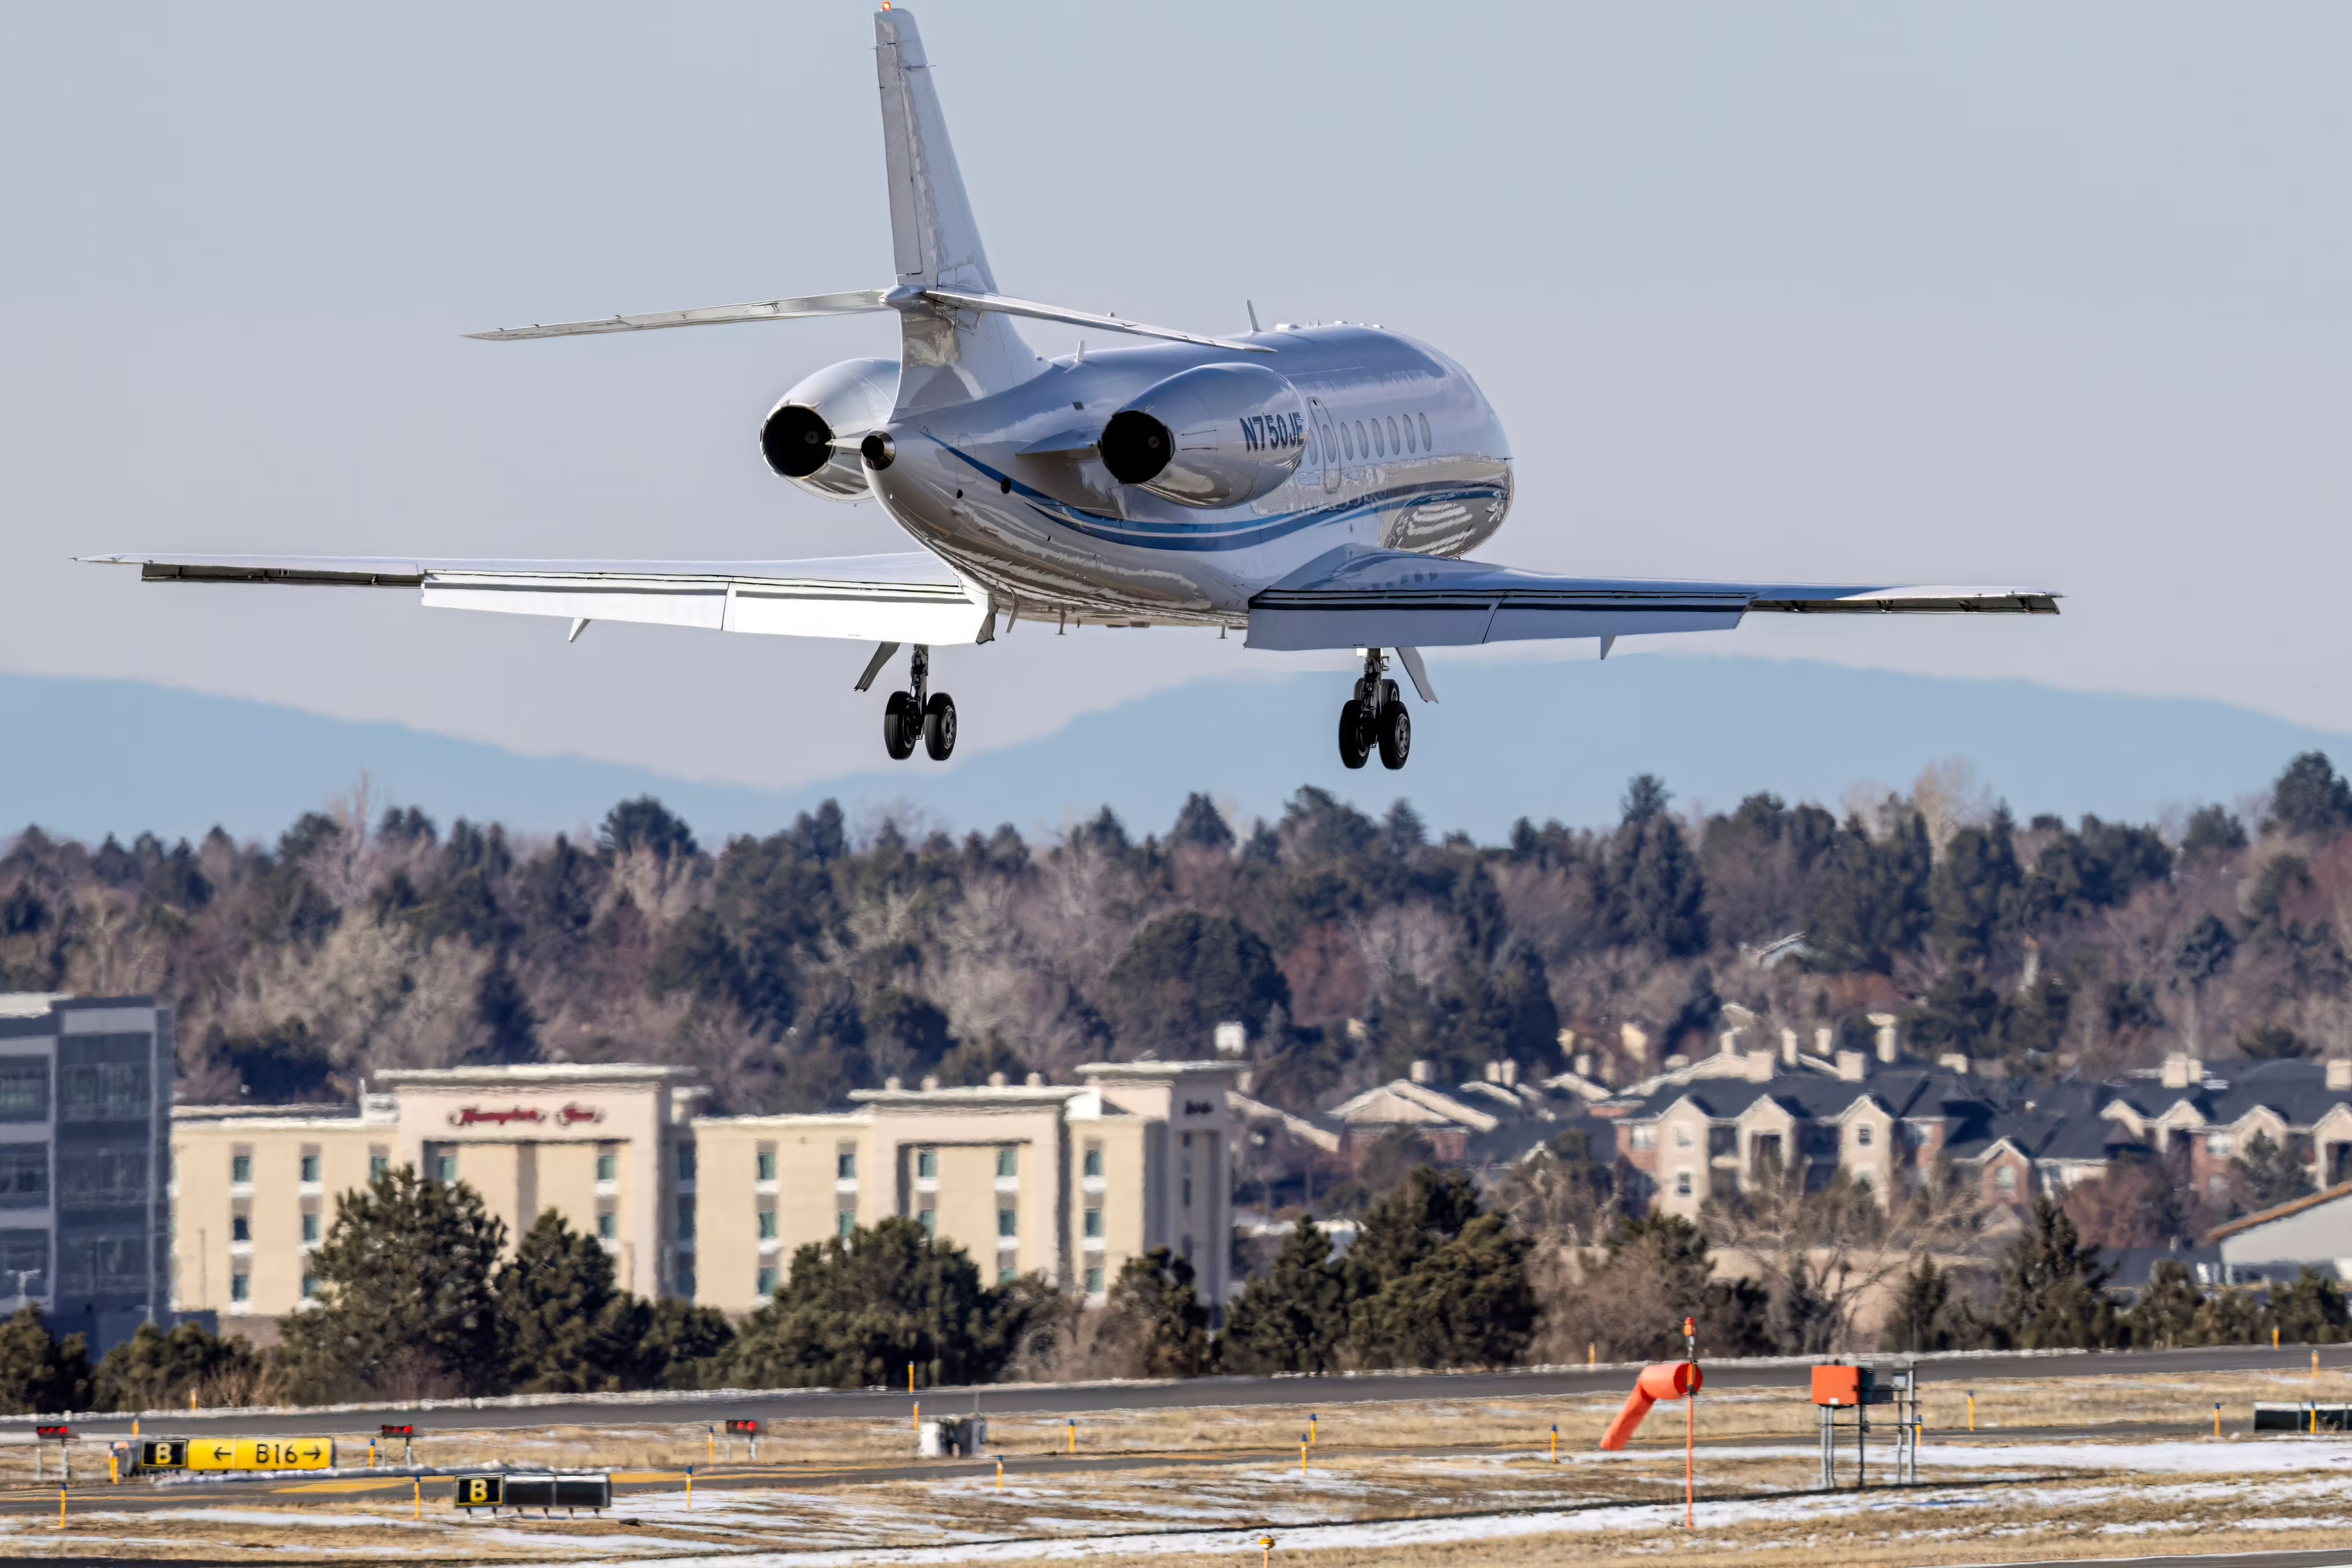 A Dassault Falcon 2000 about to land on a runway.